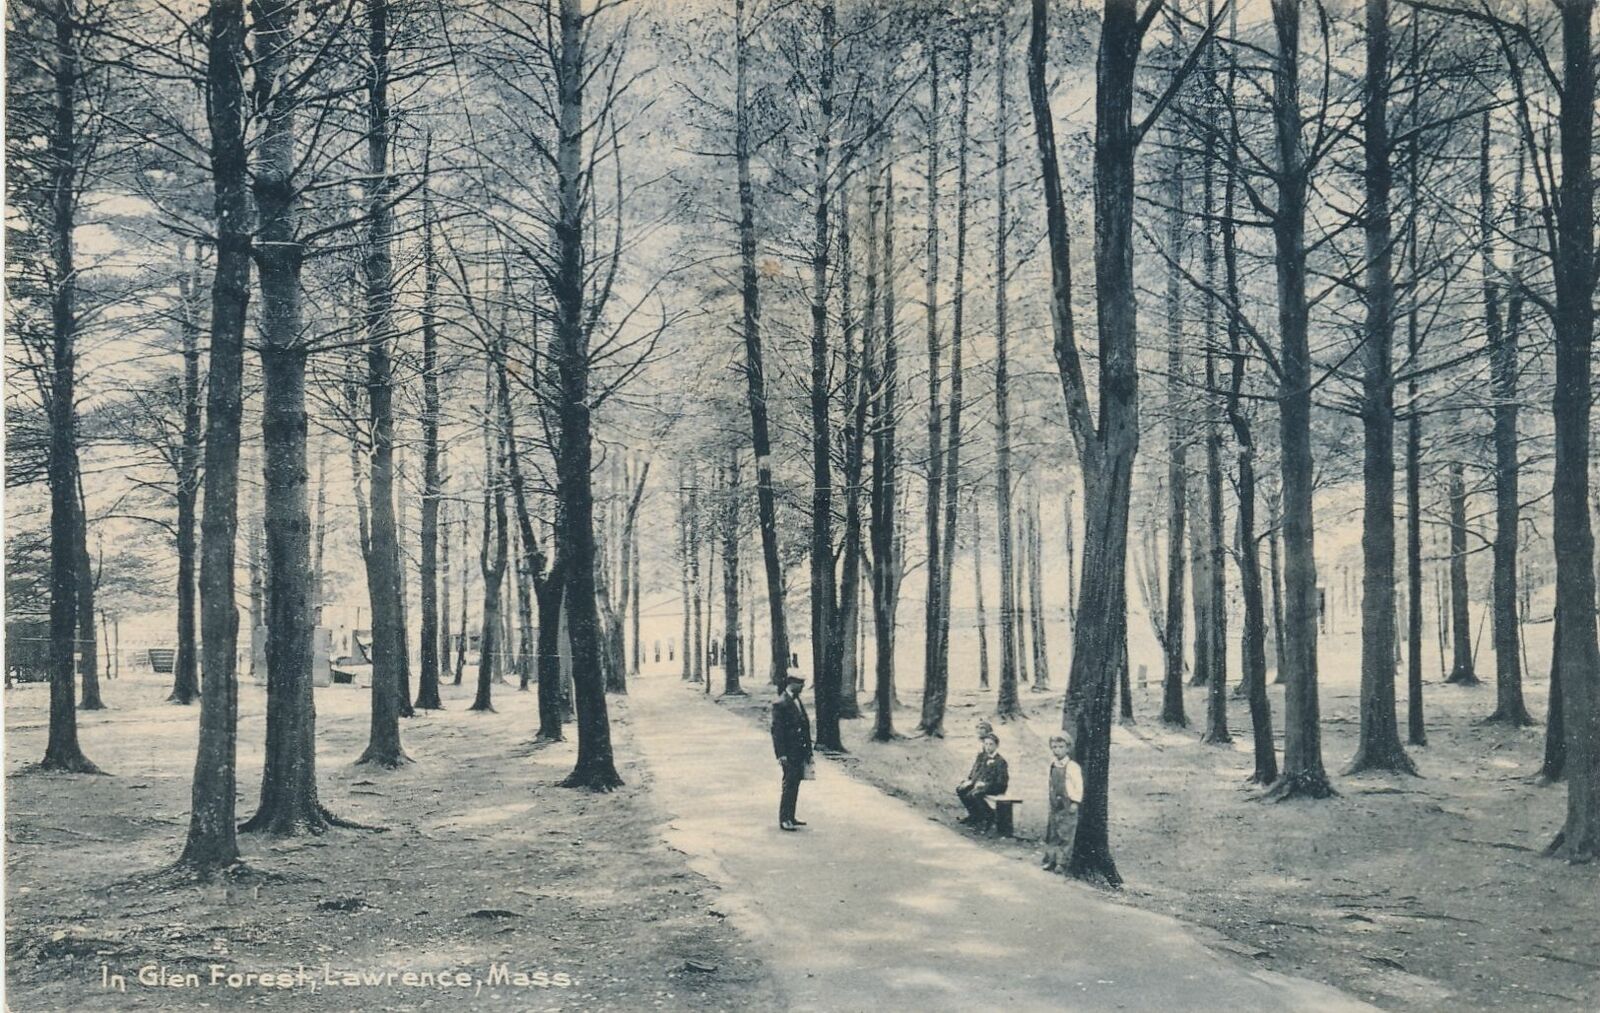 LAWRENCE MA - In Glen Forest Rotograph Postcard - udb - mailed 1908